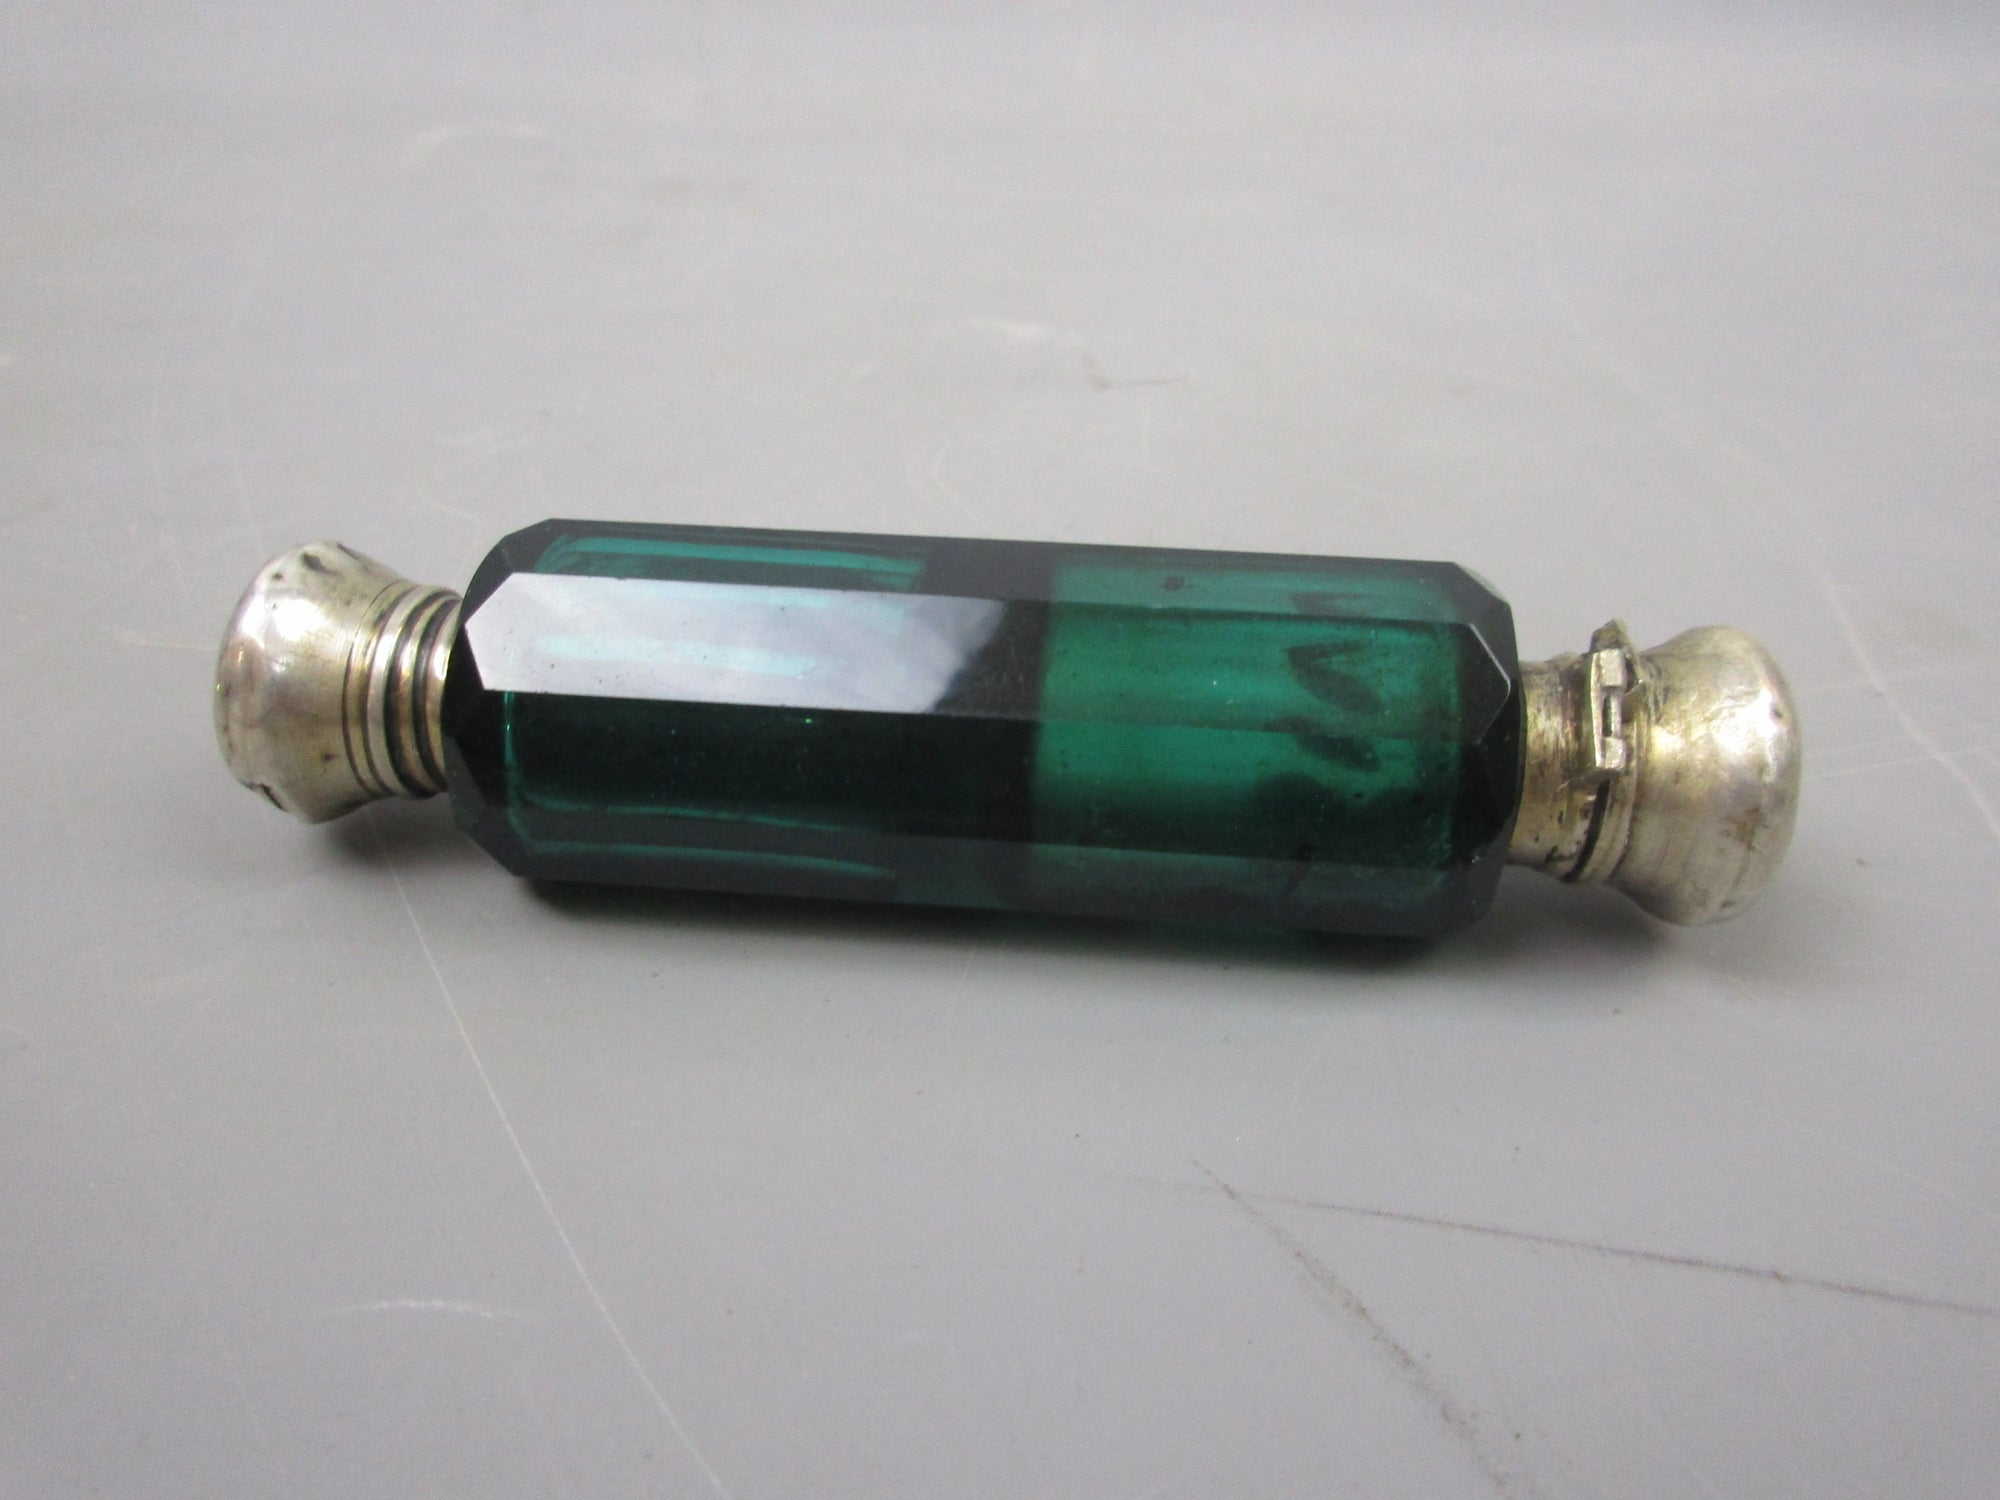 Green Glass & Silver Topped Double Ended Scent Bottle Antique Victorian c1890